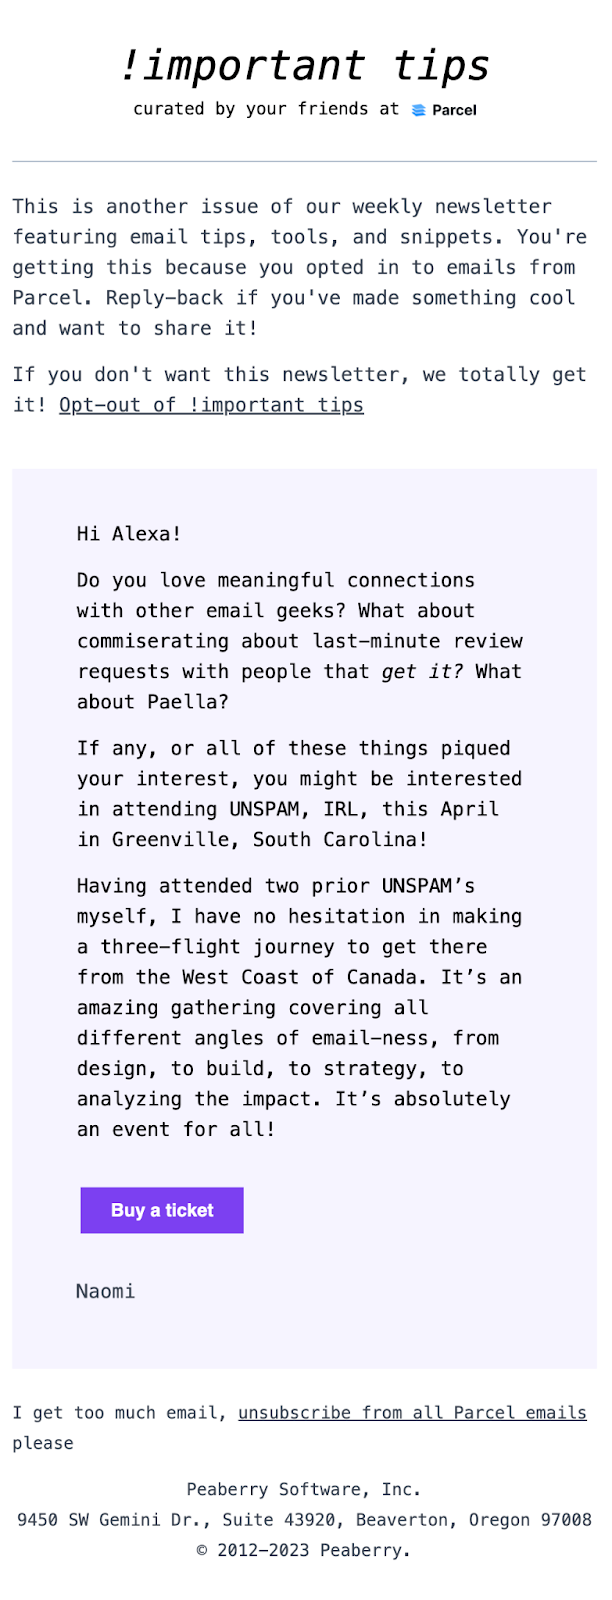 Lifecycle emails: Newsletter example from Parcel